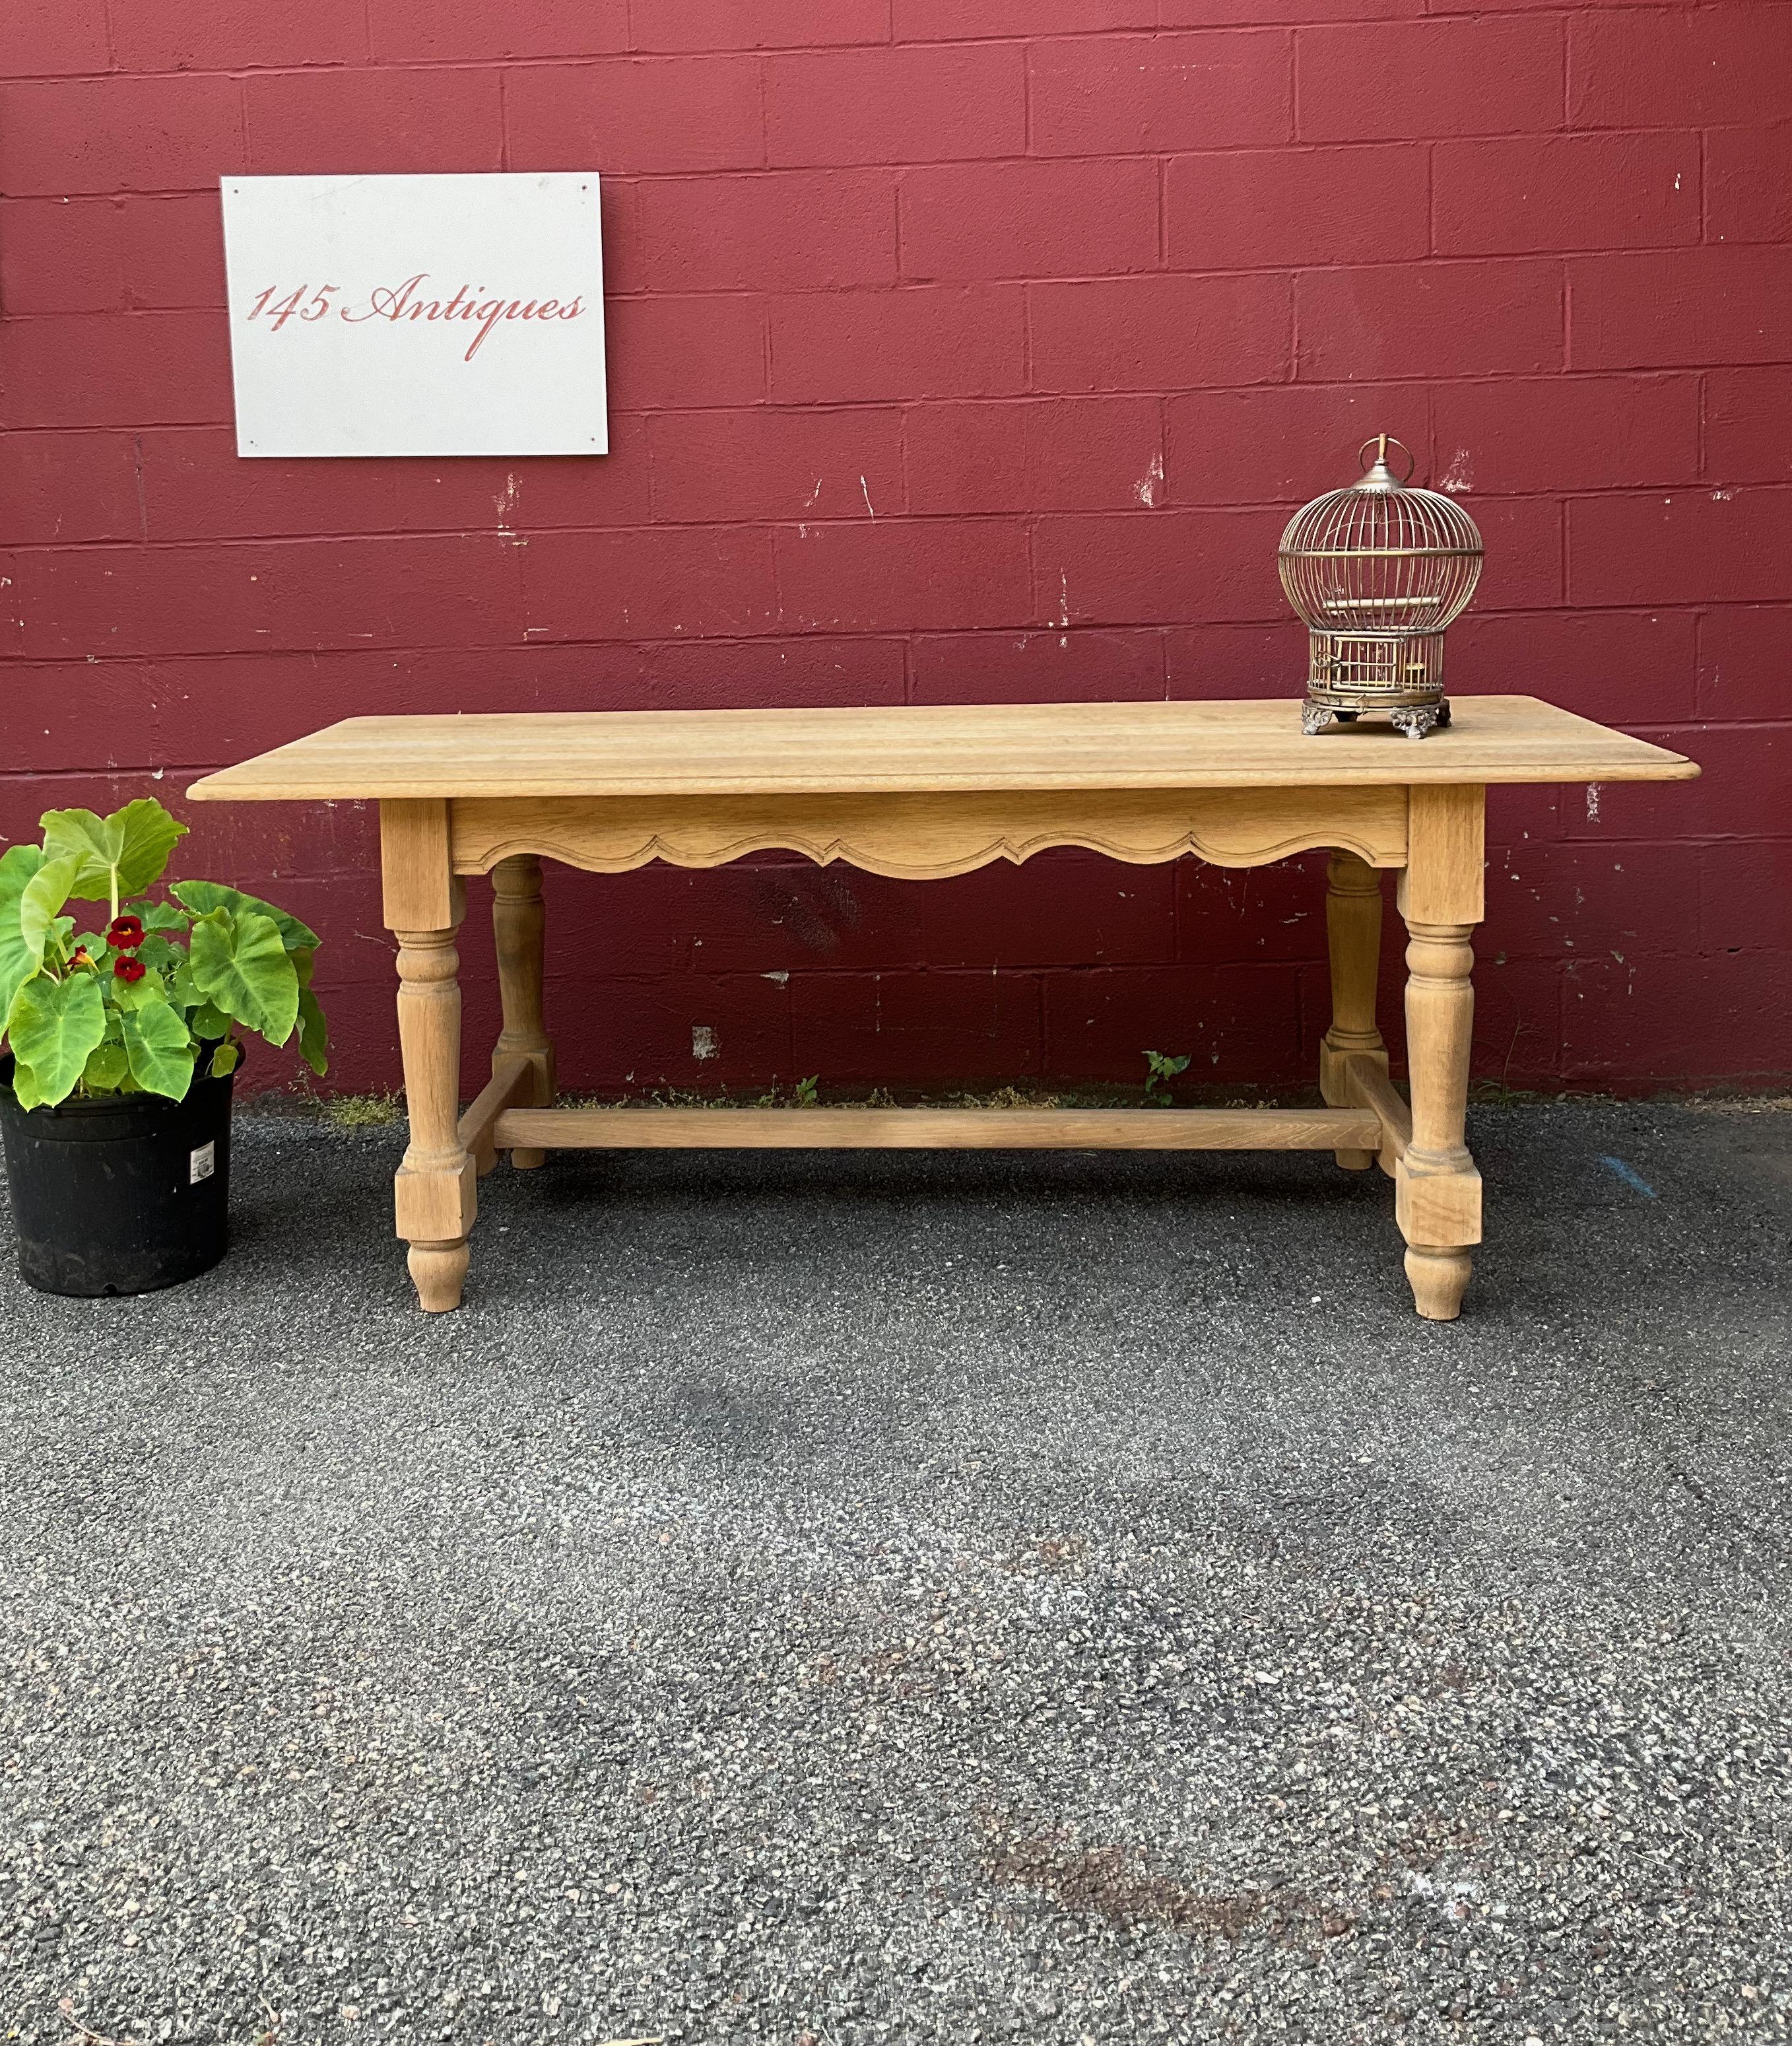 This vintage French library table in bleached oak is a rare find that will elevate any room it's placed in. The large 1950s French library or hall table boasts an impressive size of 30 inches in height, 85½ inches in width, and 35¼ inches in depth,